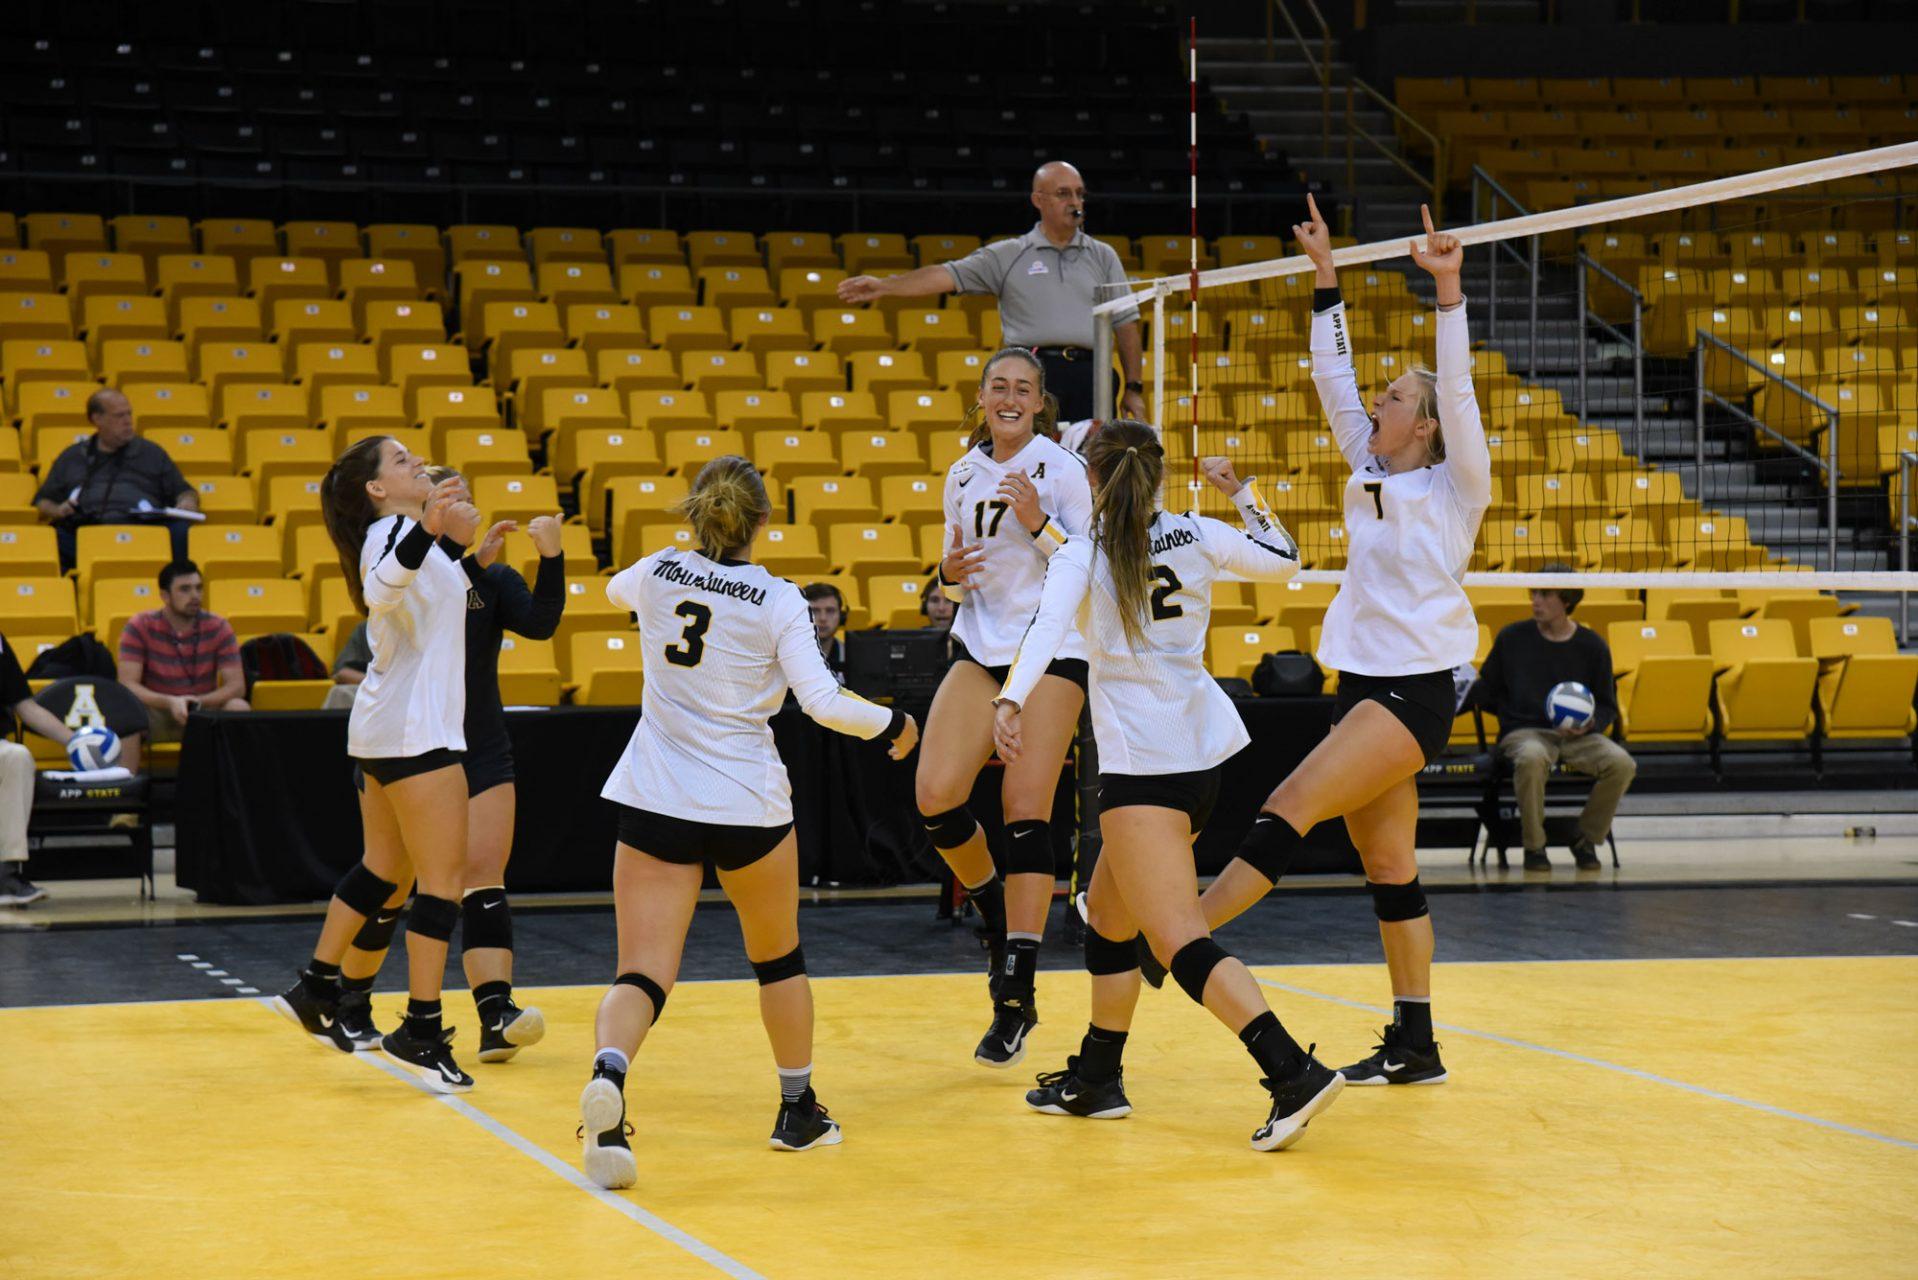 The+Appalachian+State+Volleyball+team+celebrates+a+point+from+a+spike+during+a+home+game+against+Georgia+Southern+in+2017.++The+Mountaineers+currently+sit+at+2-4+and+will+host+Iowa+State+in+the+Appalachian+Invitational+on+Sept.+13